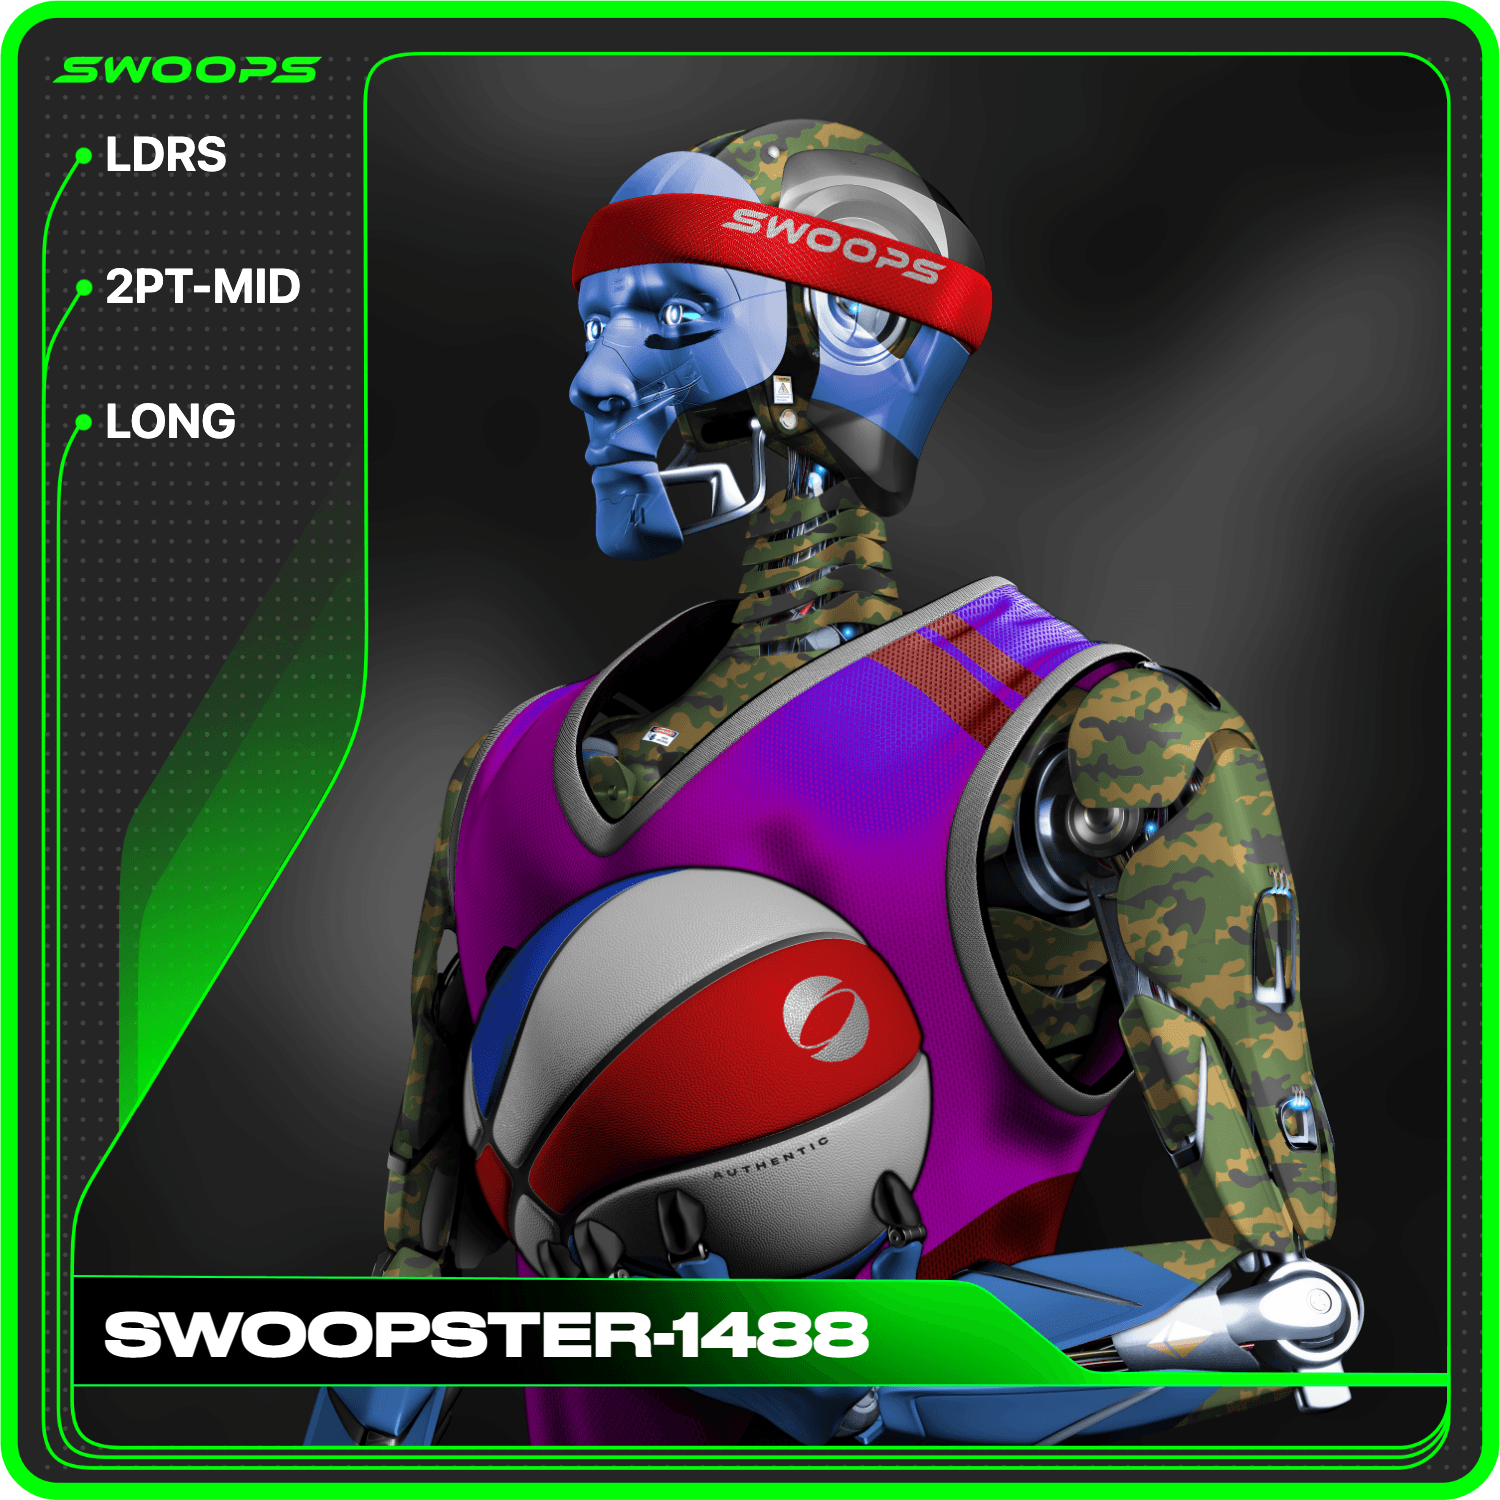 SWOOPSTER-1488